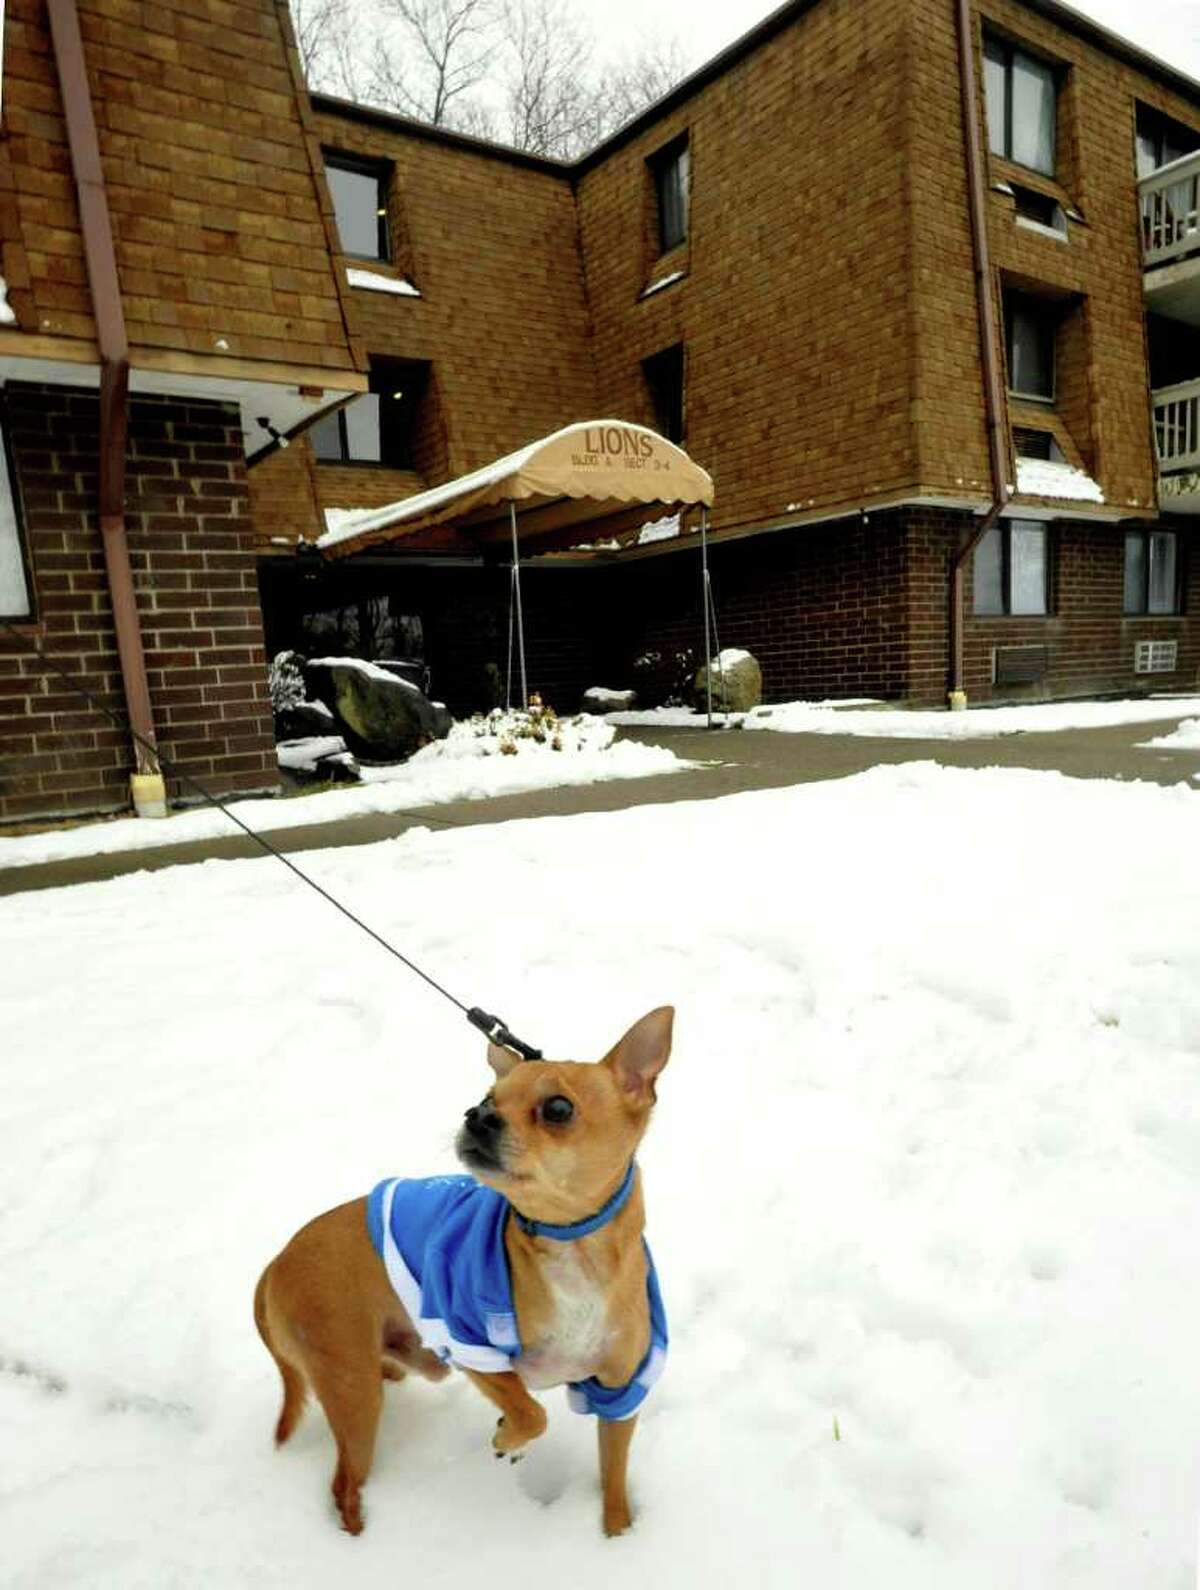 Georgie the chihuahua stands outside a Danbury condonium Friday, Feb. 24, 2012. The condo board has said Georgie cannot stay with the Banks.